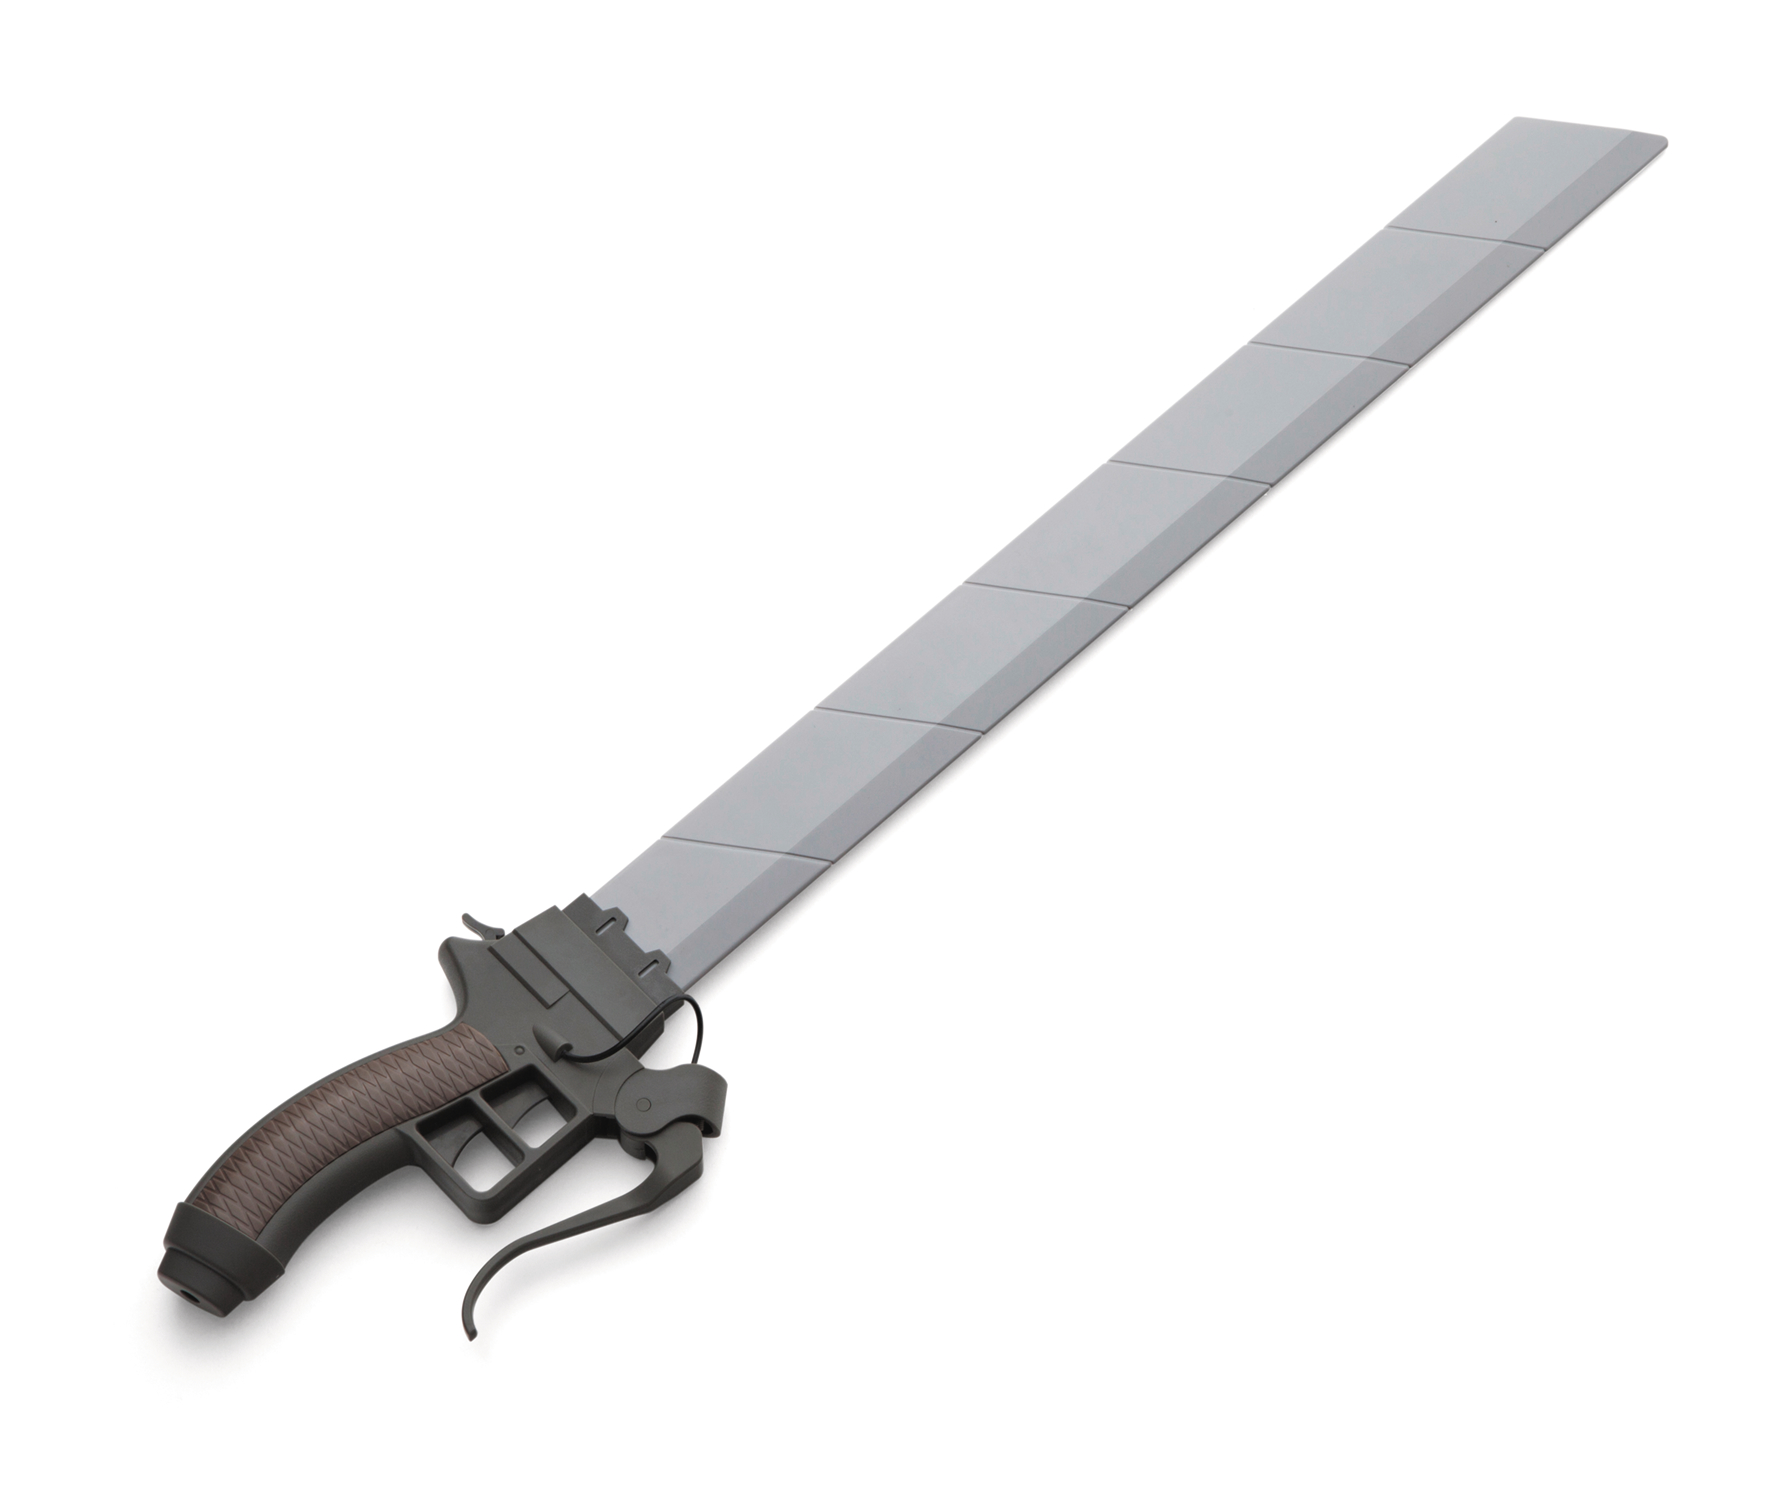 MAR169161 - ATTACK ON TITAN ROLEPLAY SWORD - Previews World